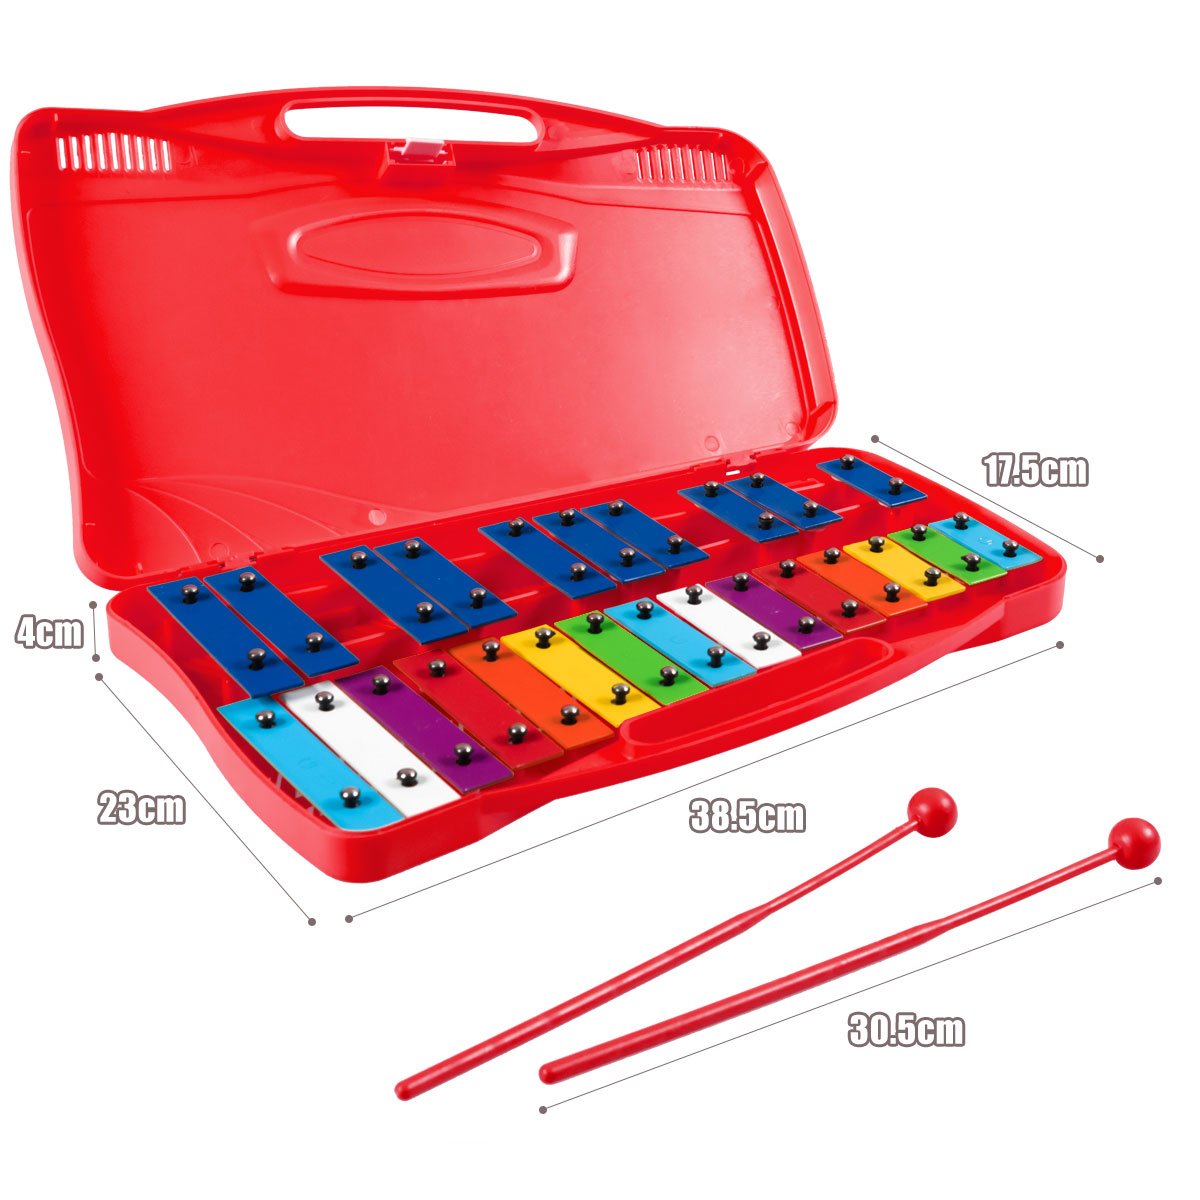 Captivating Tunes: 25 Note Xylophone with Suitcase for Kids Red